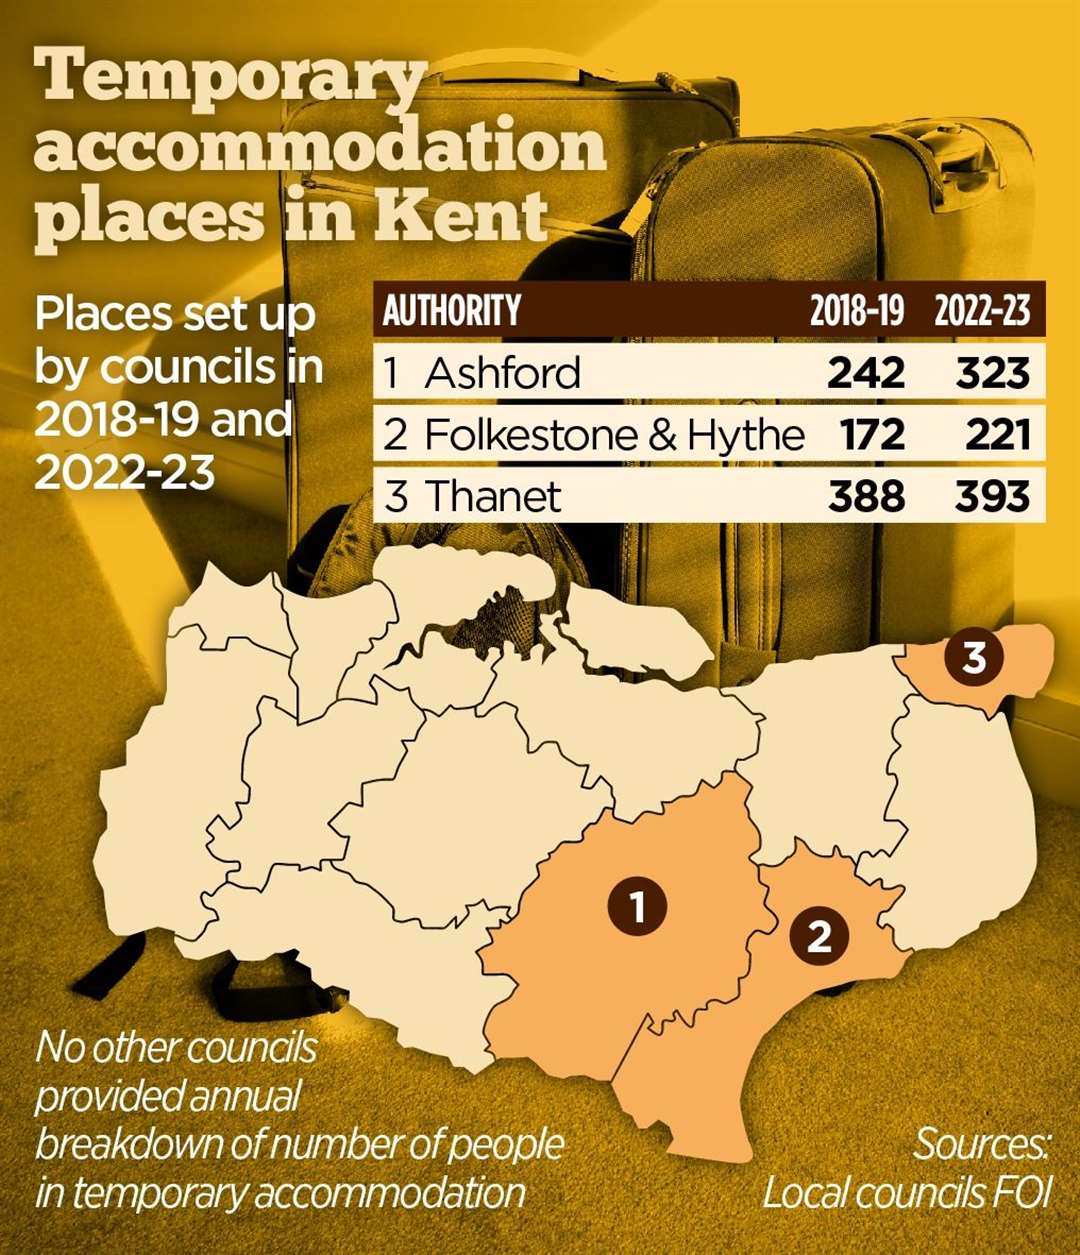 Ashford, Folkestone & Hythe and Thanet were the only councils able to provide a yearly breakdown of their temporary accommodation placements